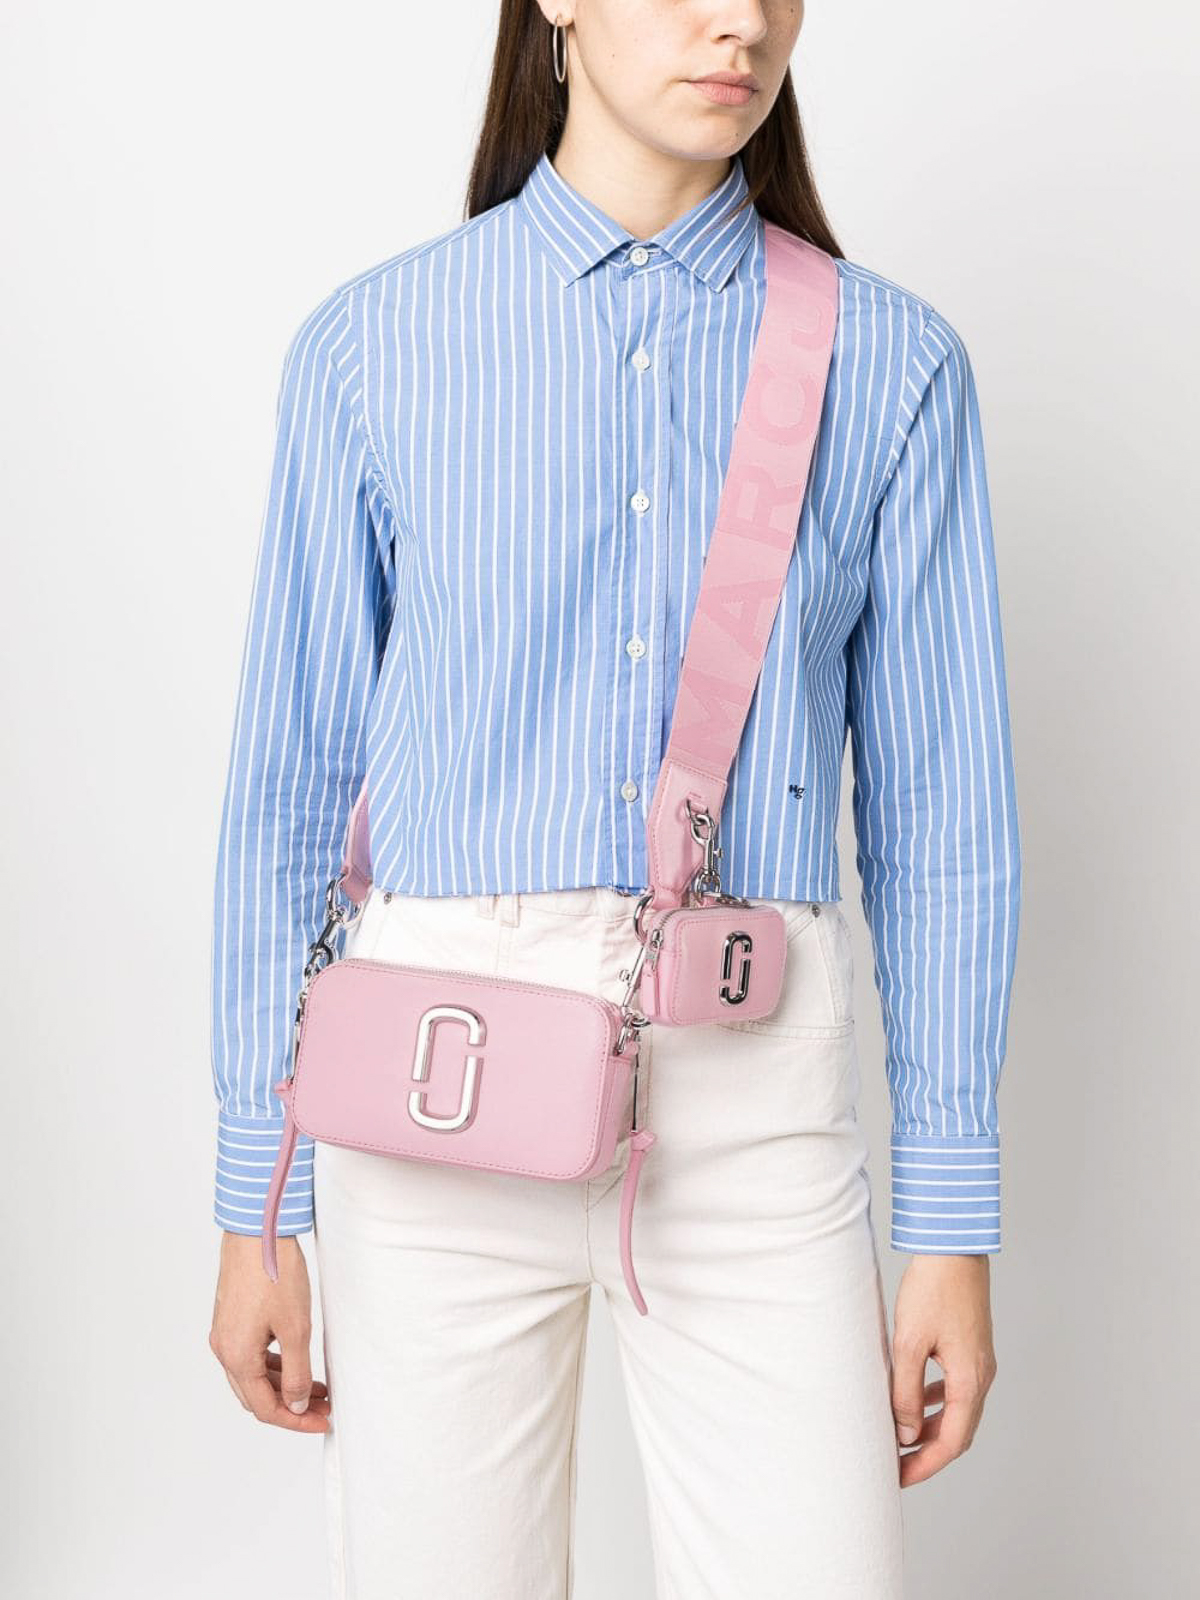 Marc Jacobs 'the Utility Snapshot' Camera Bag in Blue